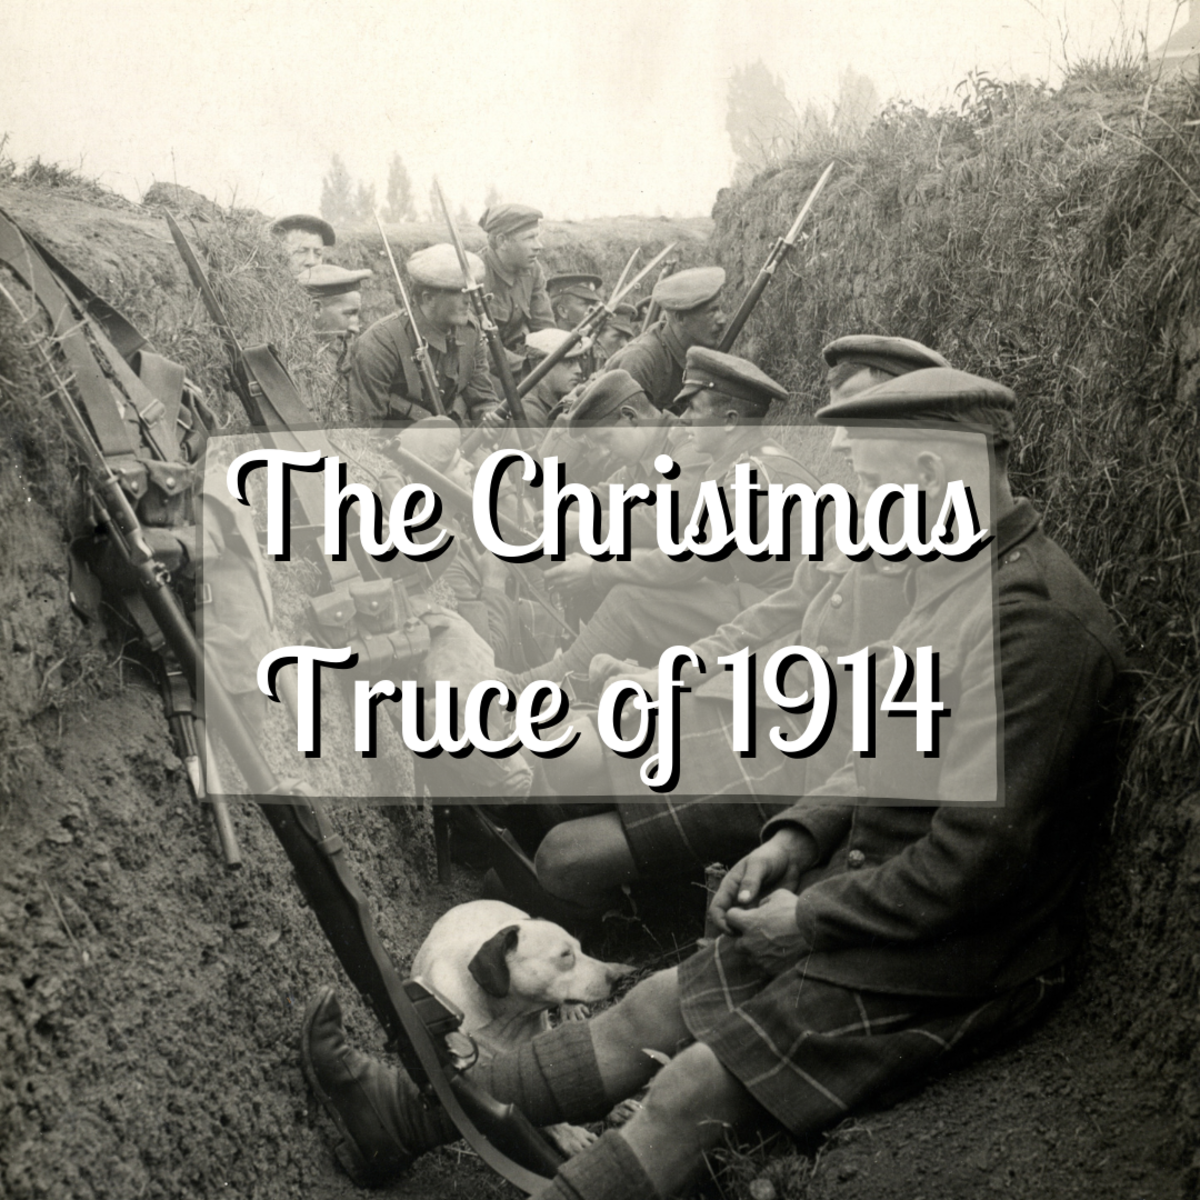 On Christmas 1914, the Western Front experienced an amazing ceasefire as British and German troops intermingled, exchanged gifts, and even sang carols. Read on to learn more about this singular historical event.